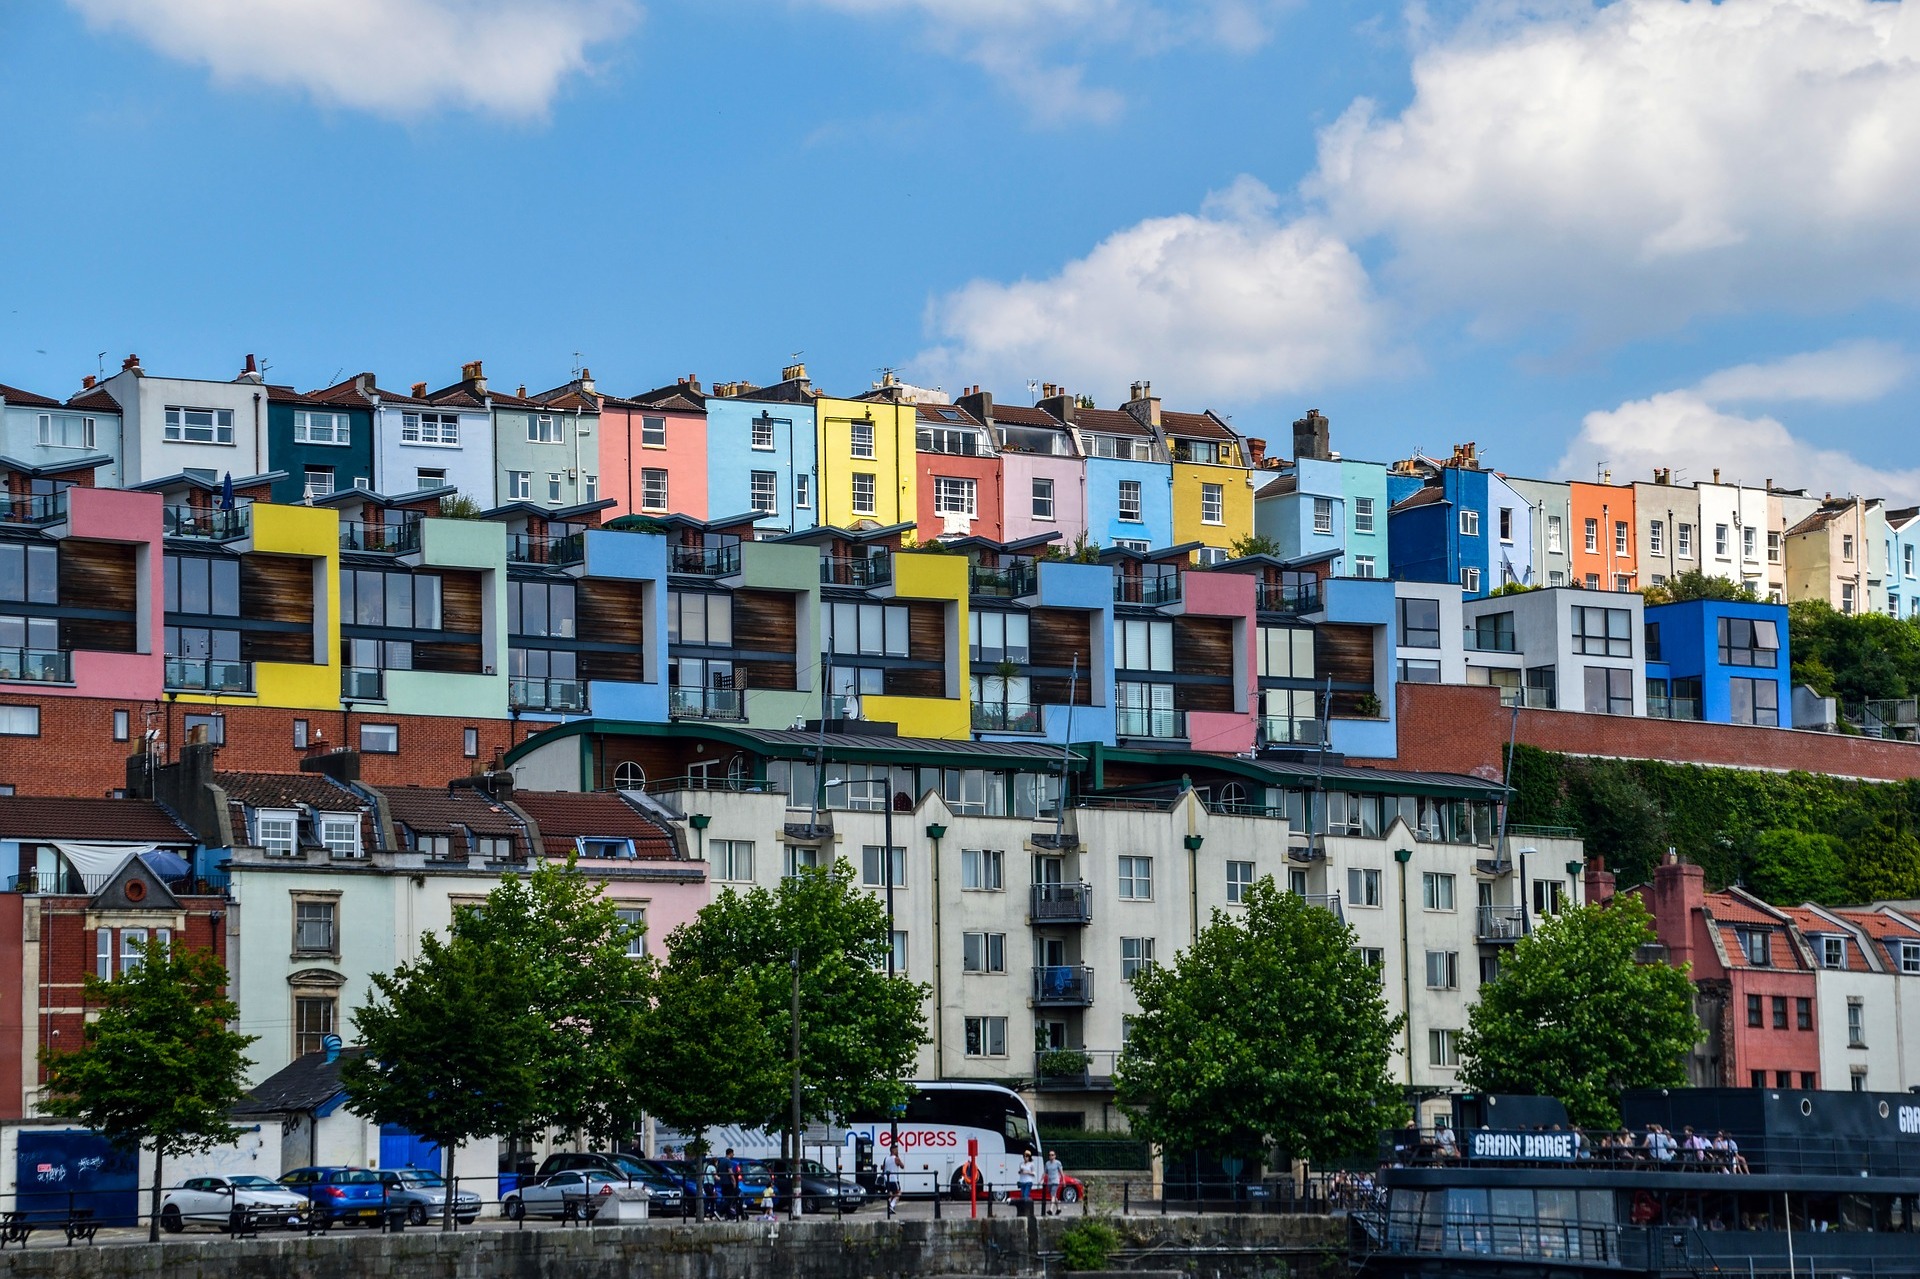 A row of colourful houses in Bristol